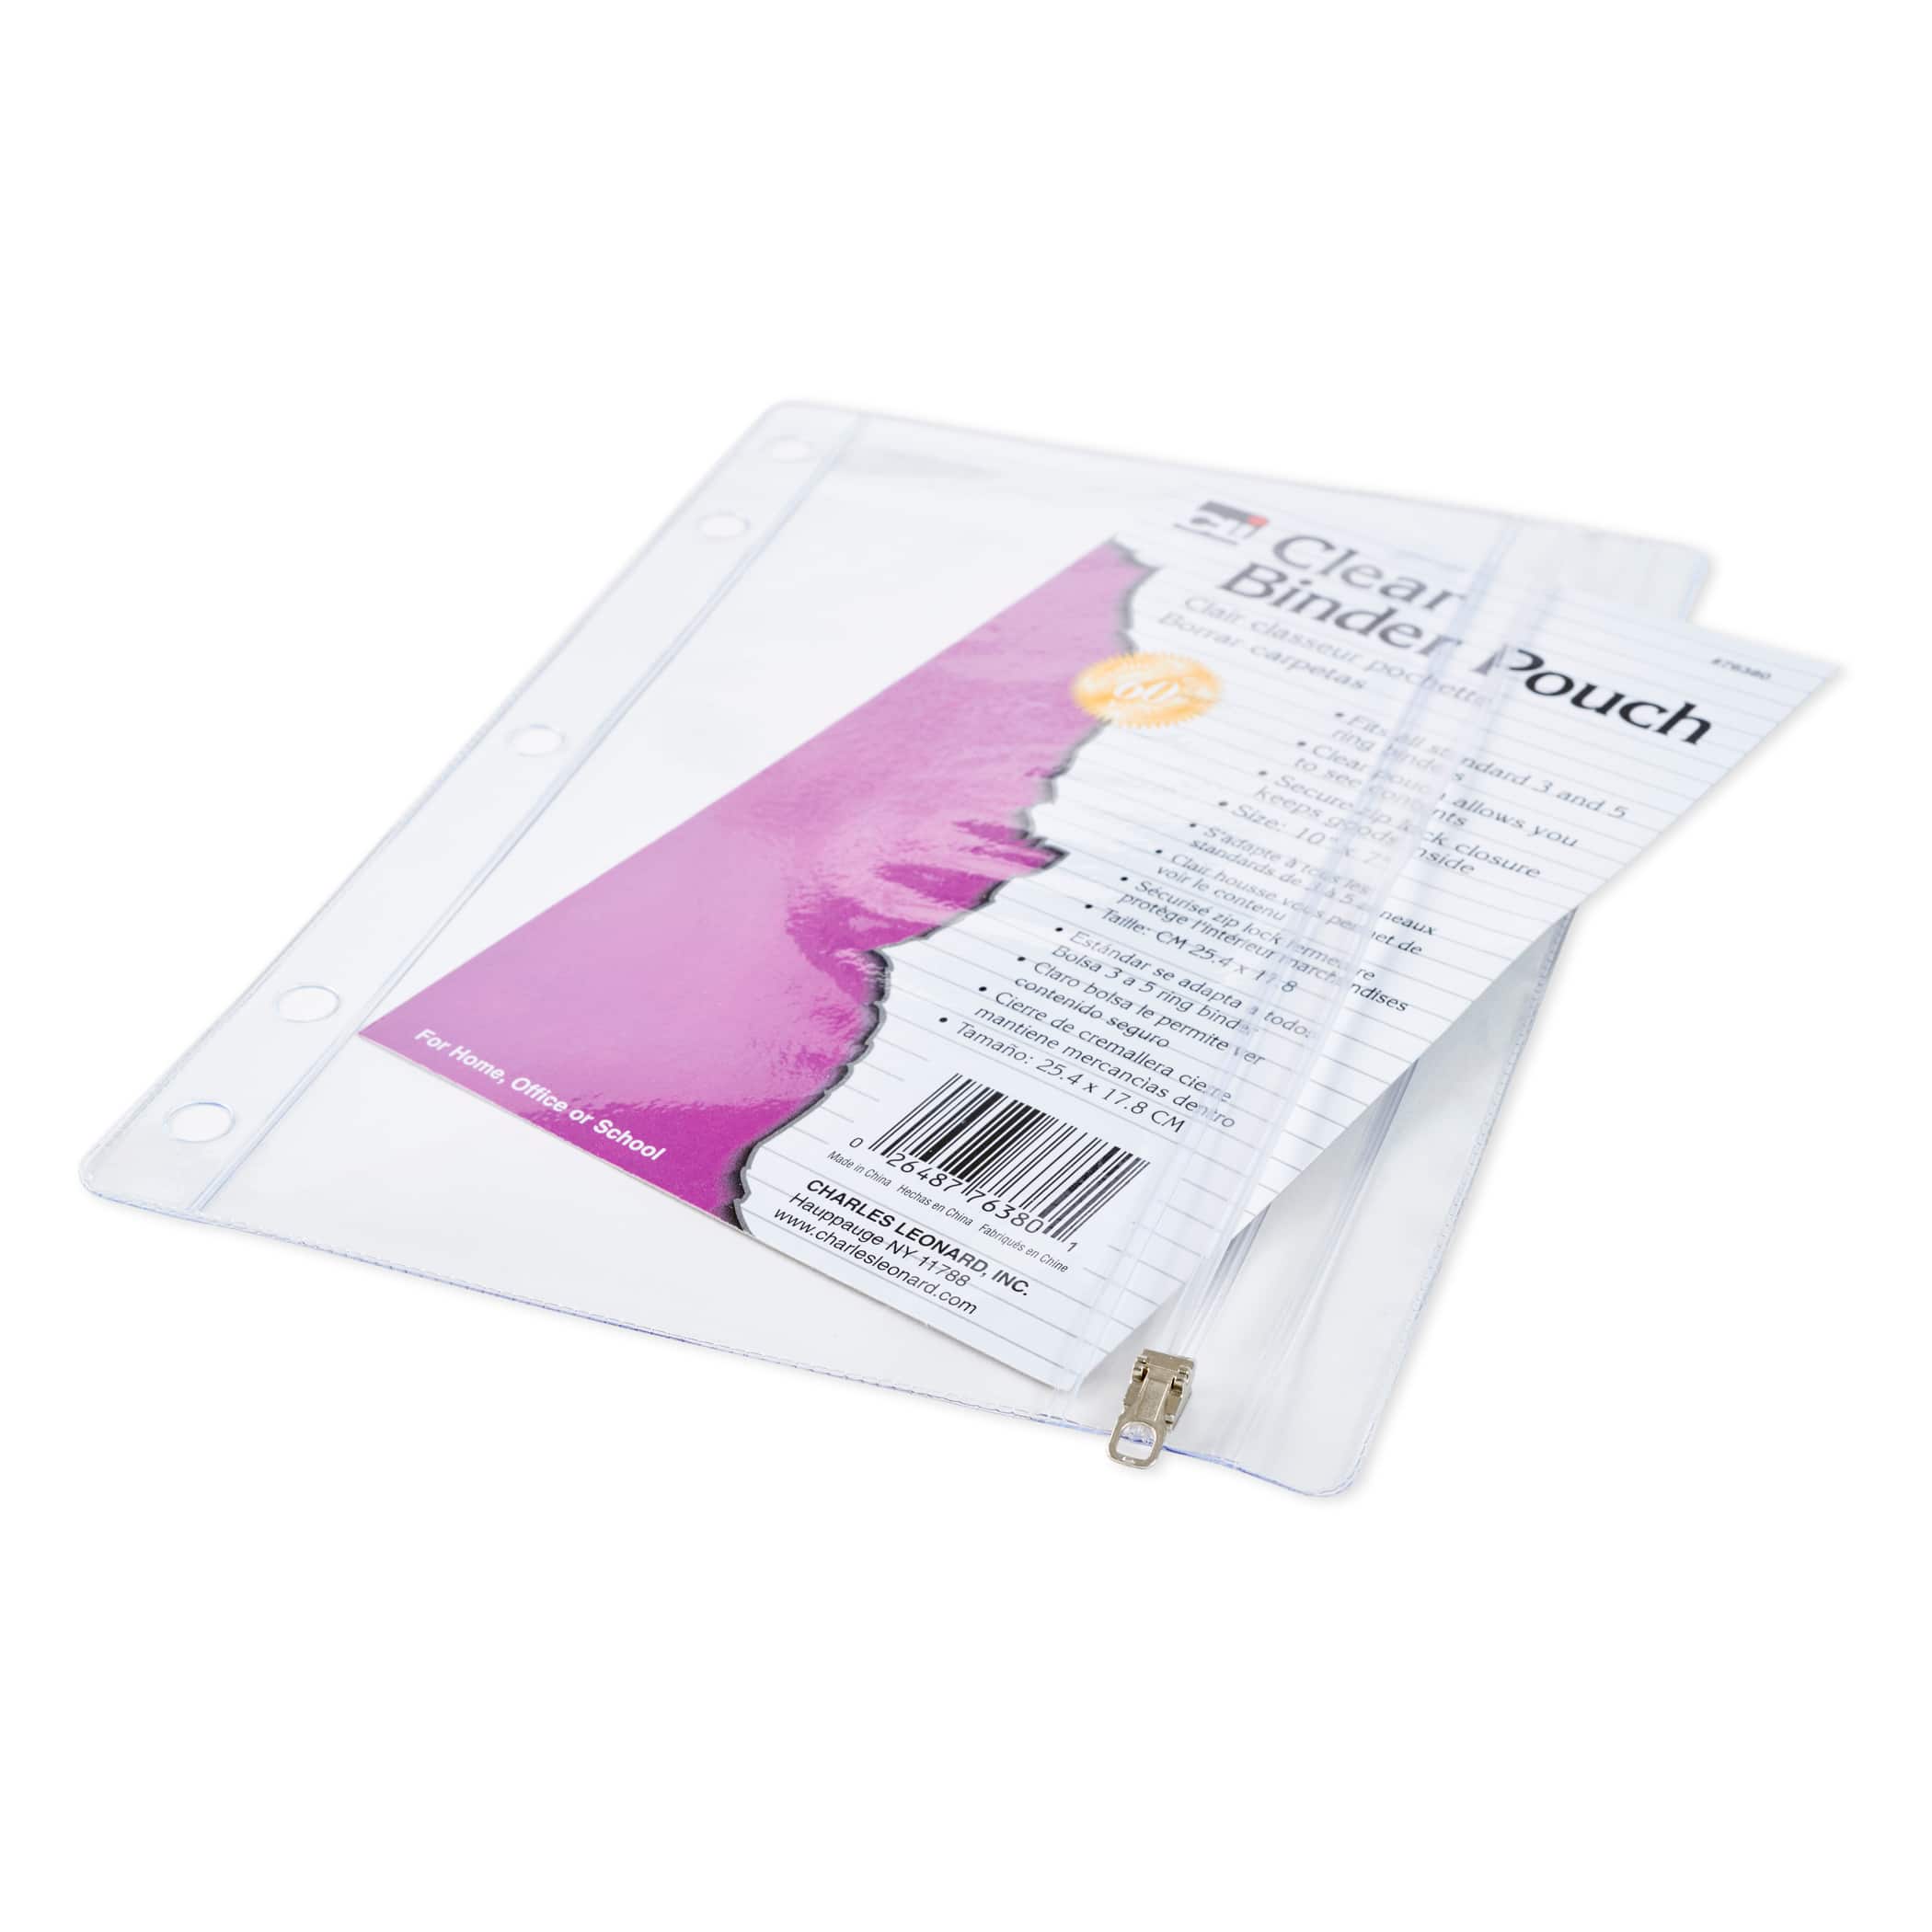 4 Packs: 24 ct. (96 total) Clear Vinyl Pencil Pouches with Zip